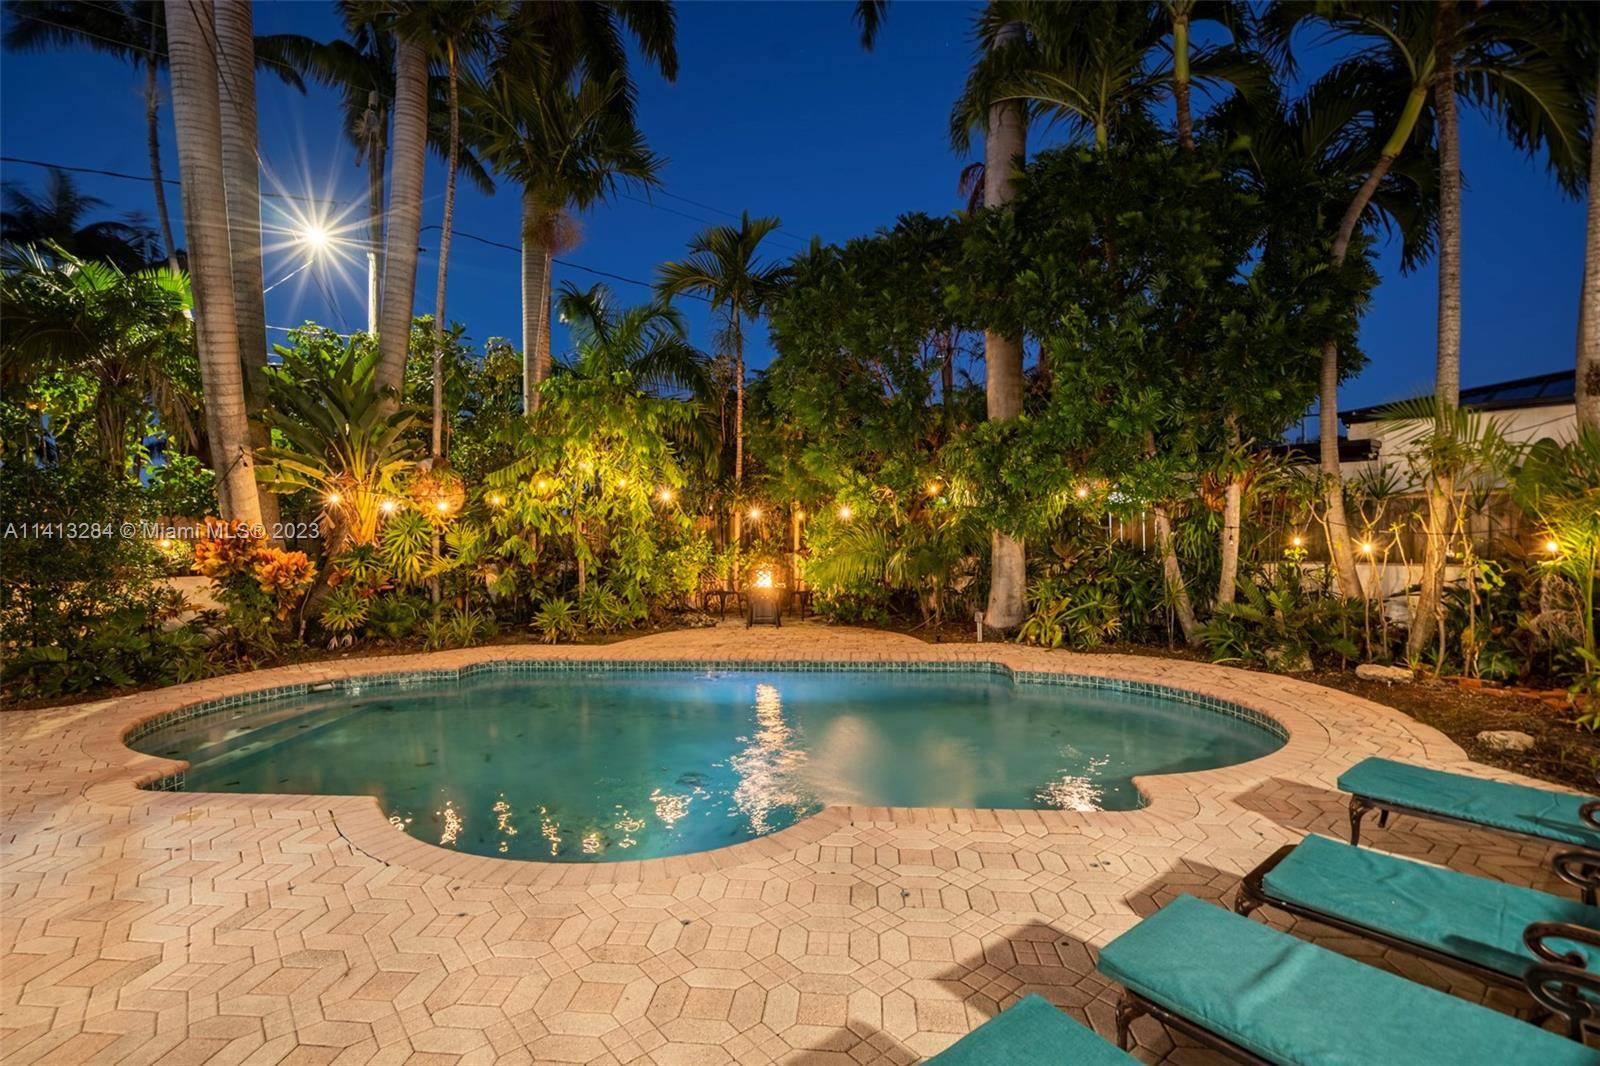 Discover your perfect retreat just minutes away from the world famous Hollywood Beach.